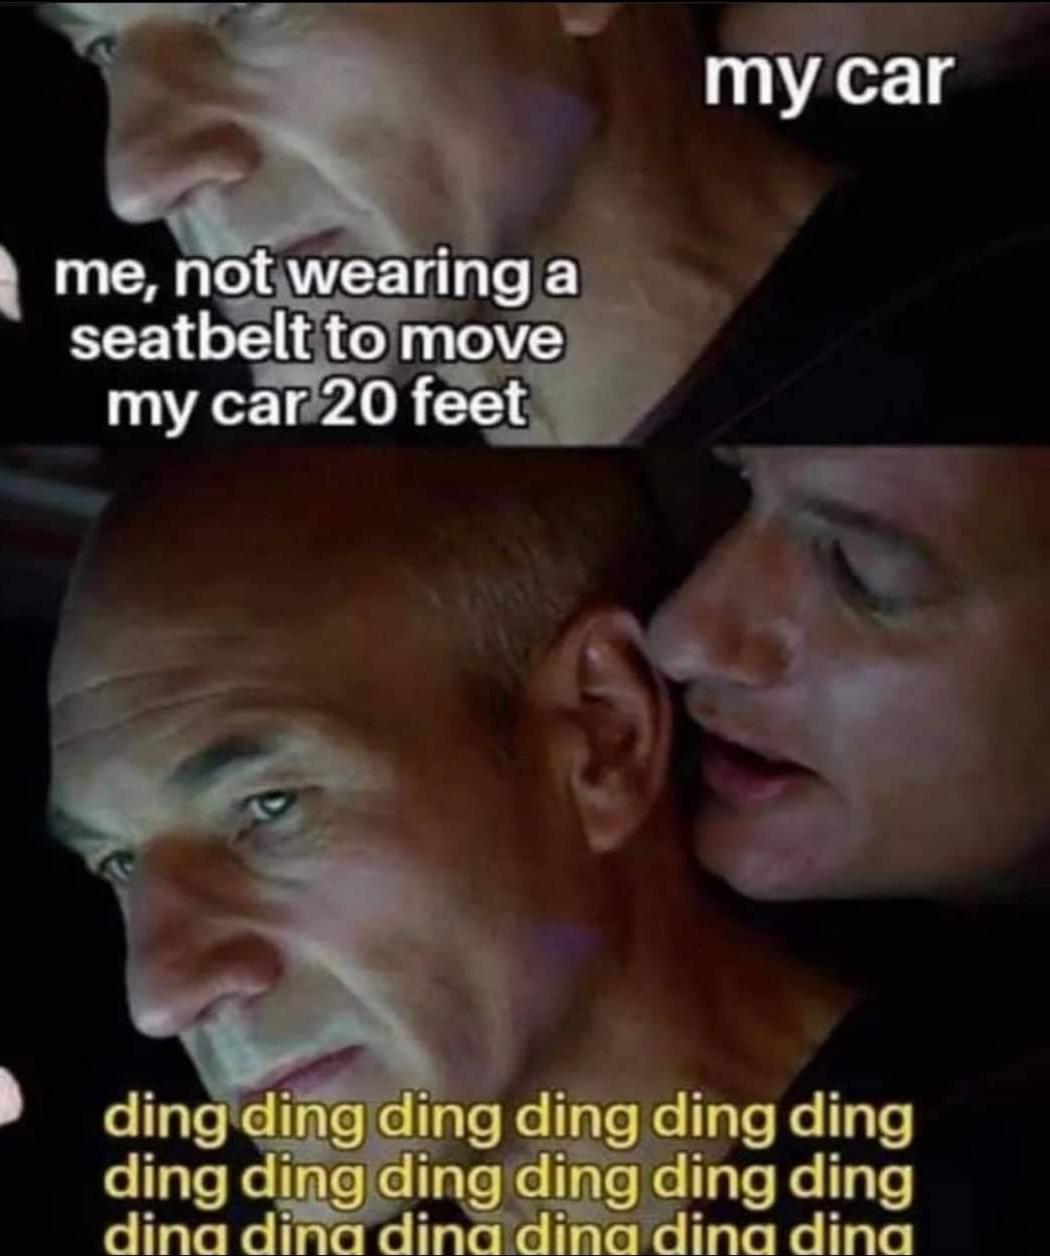 funny pics and cool randoms - my car me, not wearing a seatbelt to move my car 20 feet ding ding ding ding ding ding ding ding ding ding ding ding dina dina dina dina dina dina